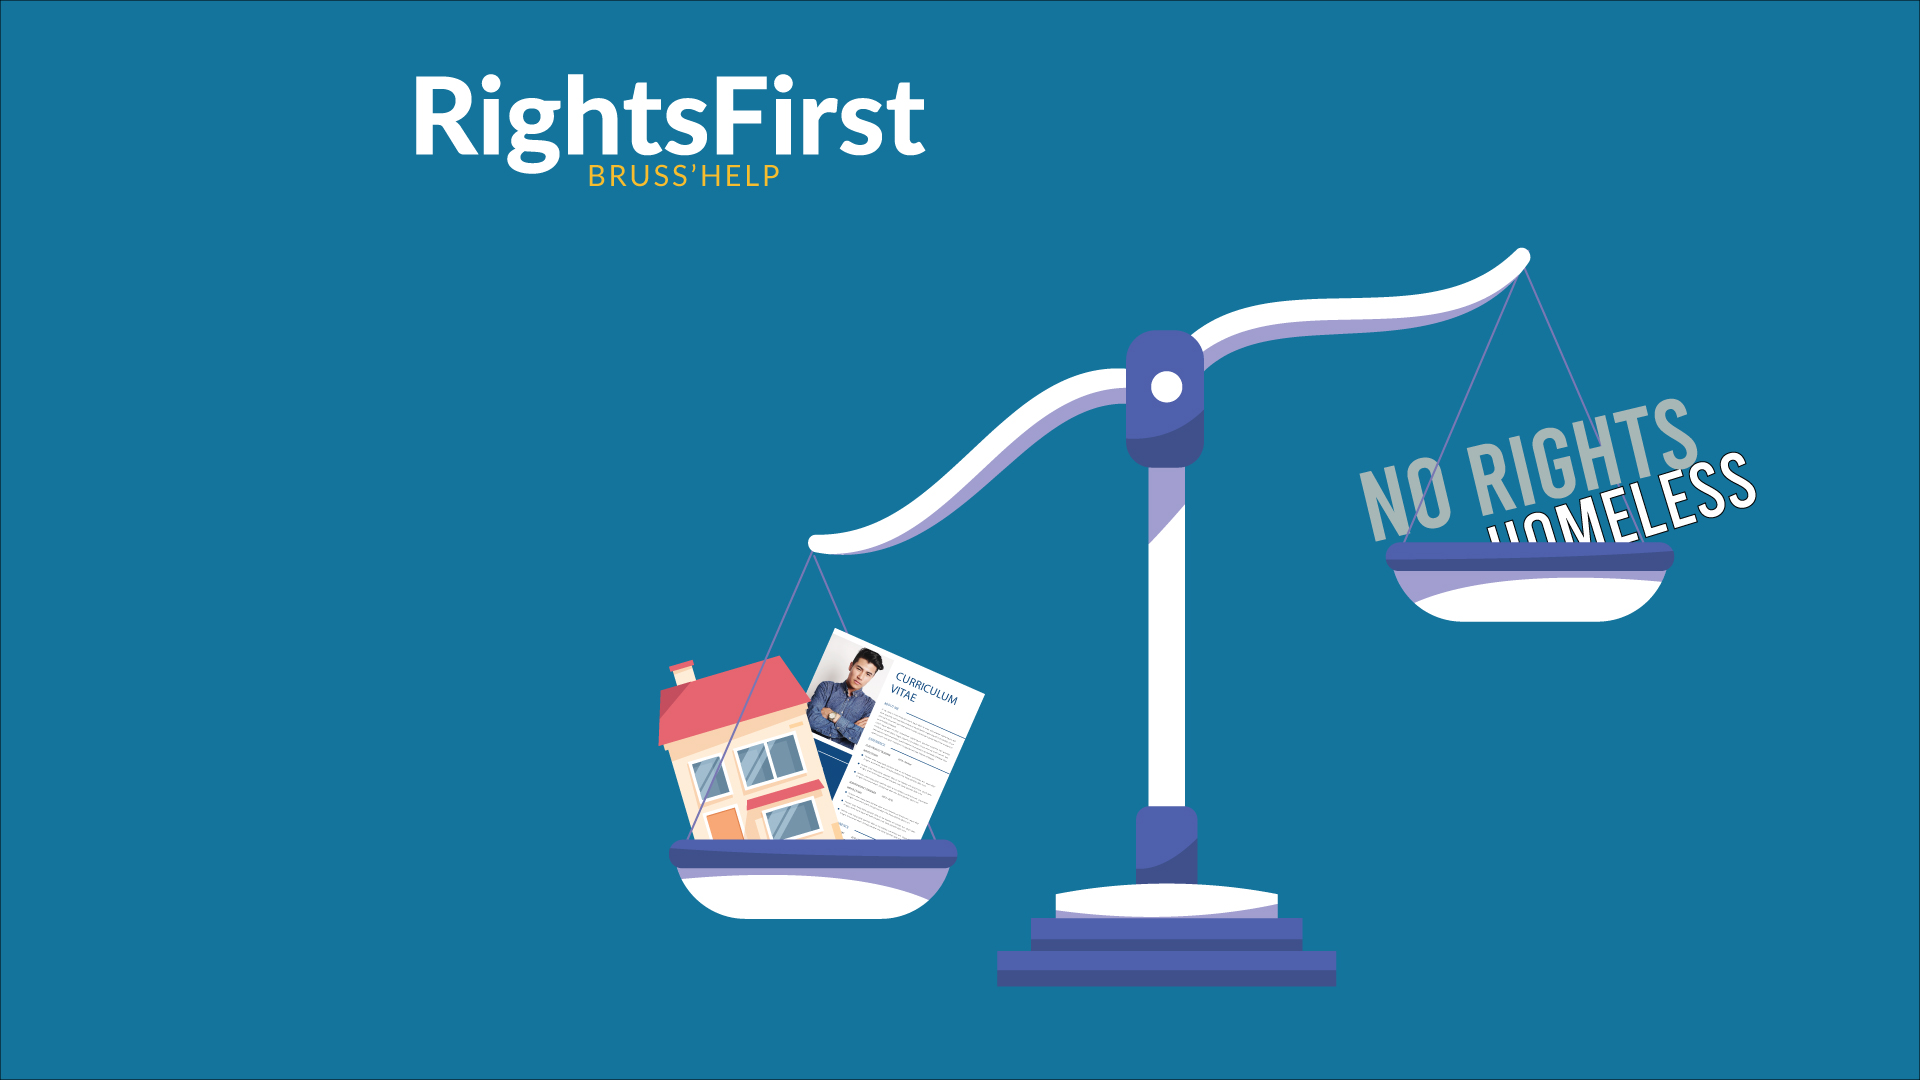 RightsFirst